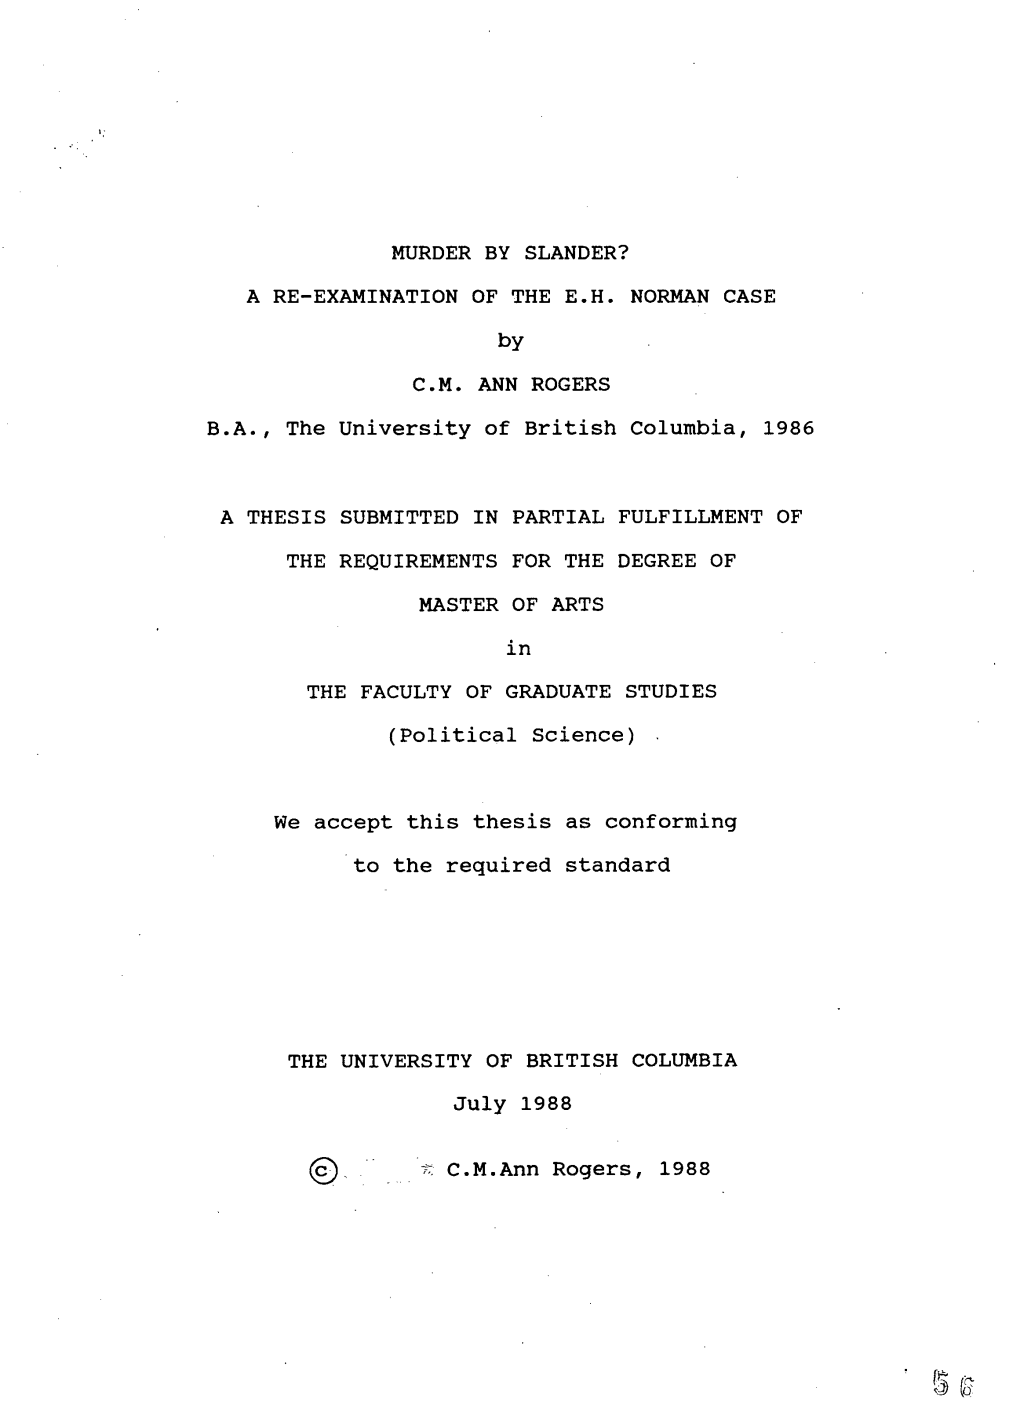 MURDER by SLANDER? a RE-EXAMINATION of the E.H. NORMAN CASE by C M . ANN ROGERS .A., the University of British Columbia, 1986 K